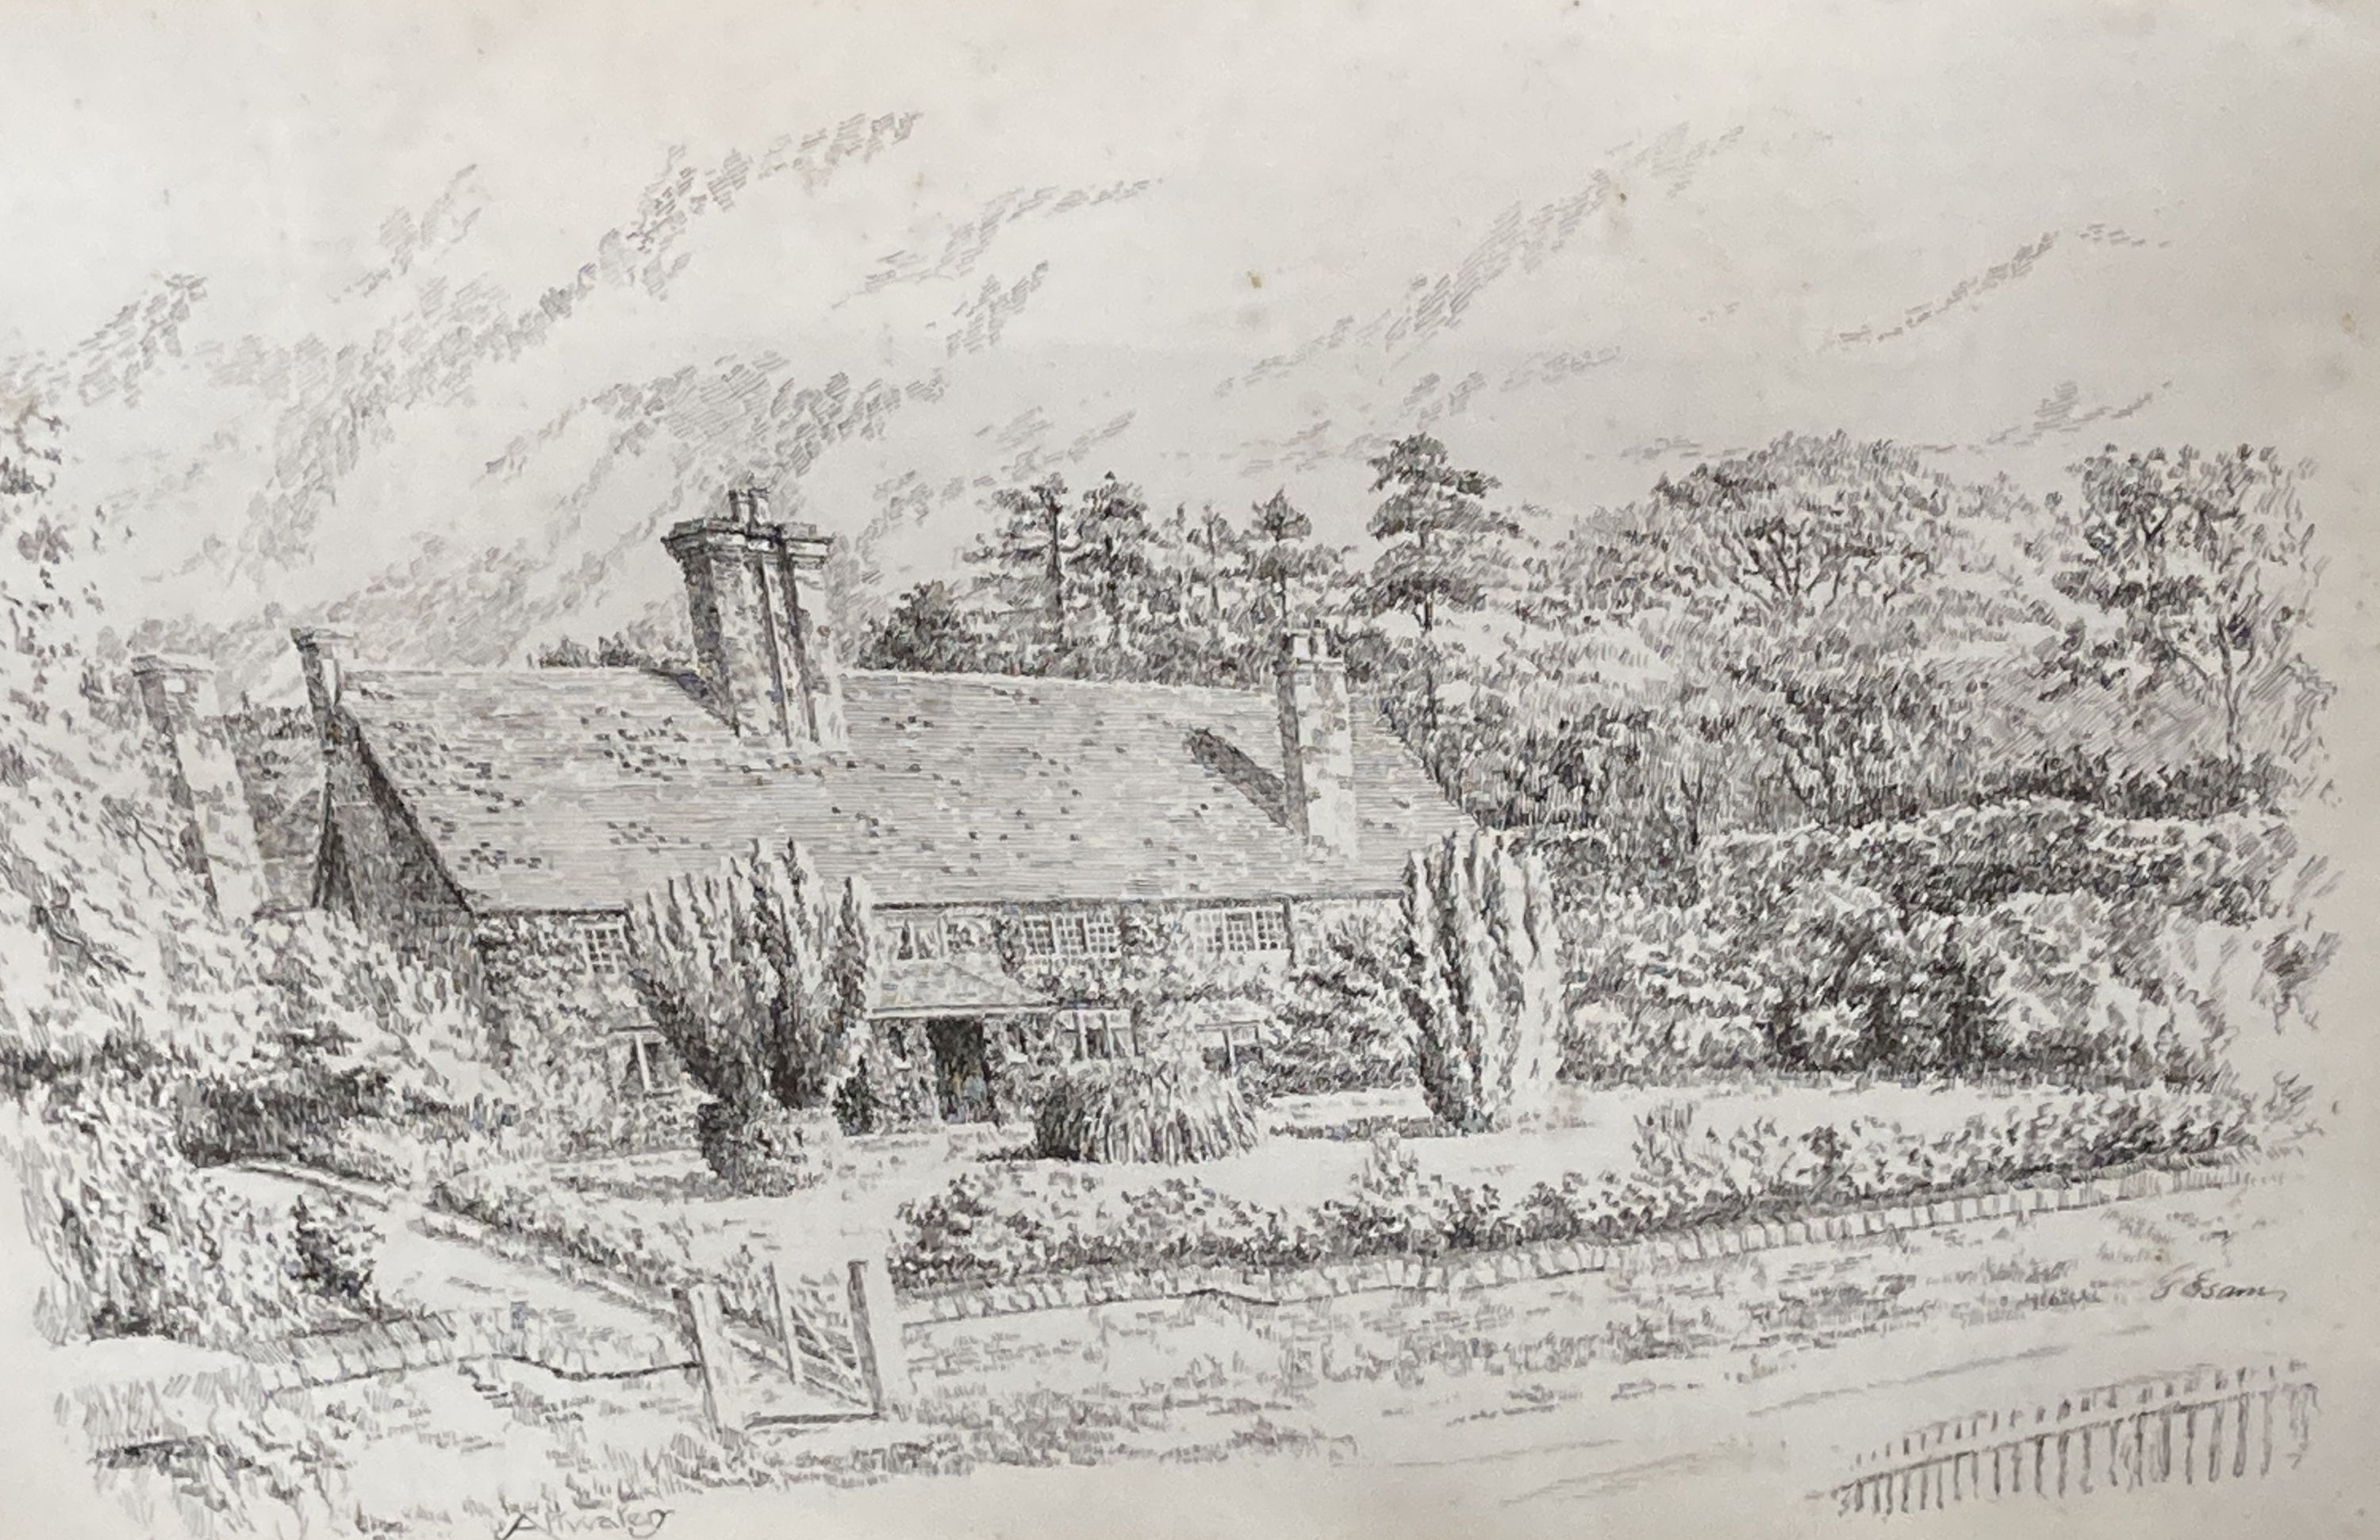 F. Esam c.1900, 5 pen and ink drawings: Highgate, Hawkhurst; Attwater; The Queen's Hotel, Hawkhurst; - Image 5 of 5